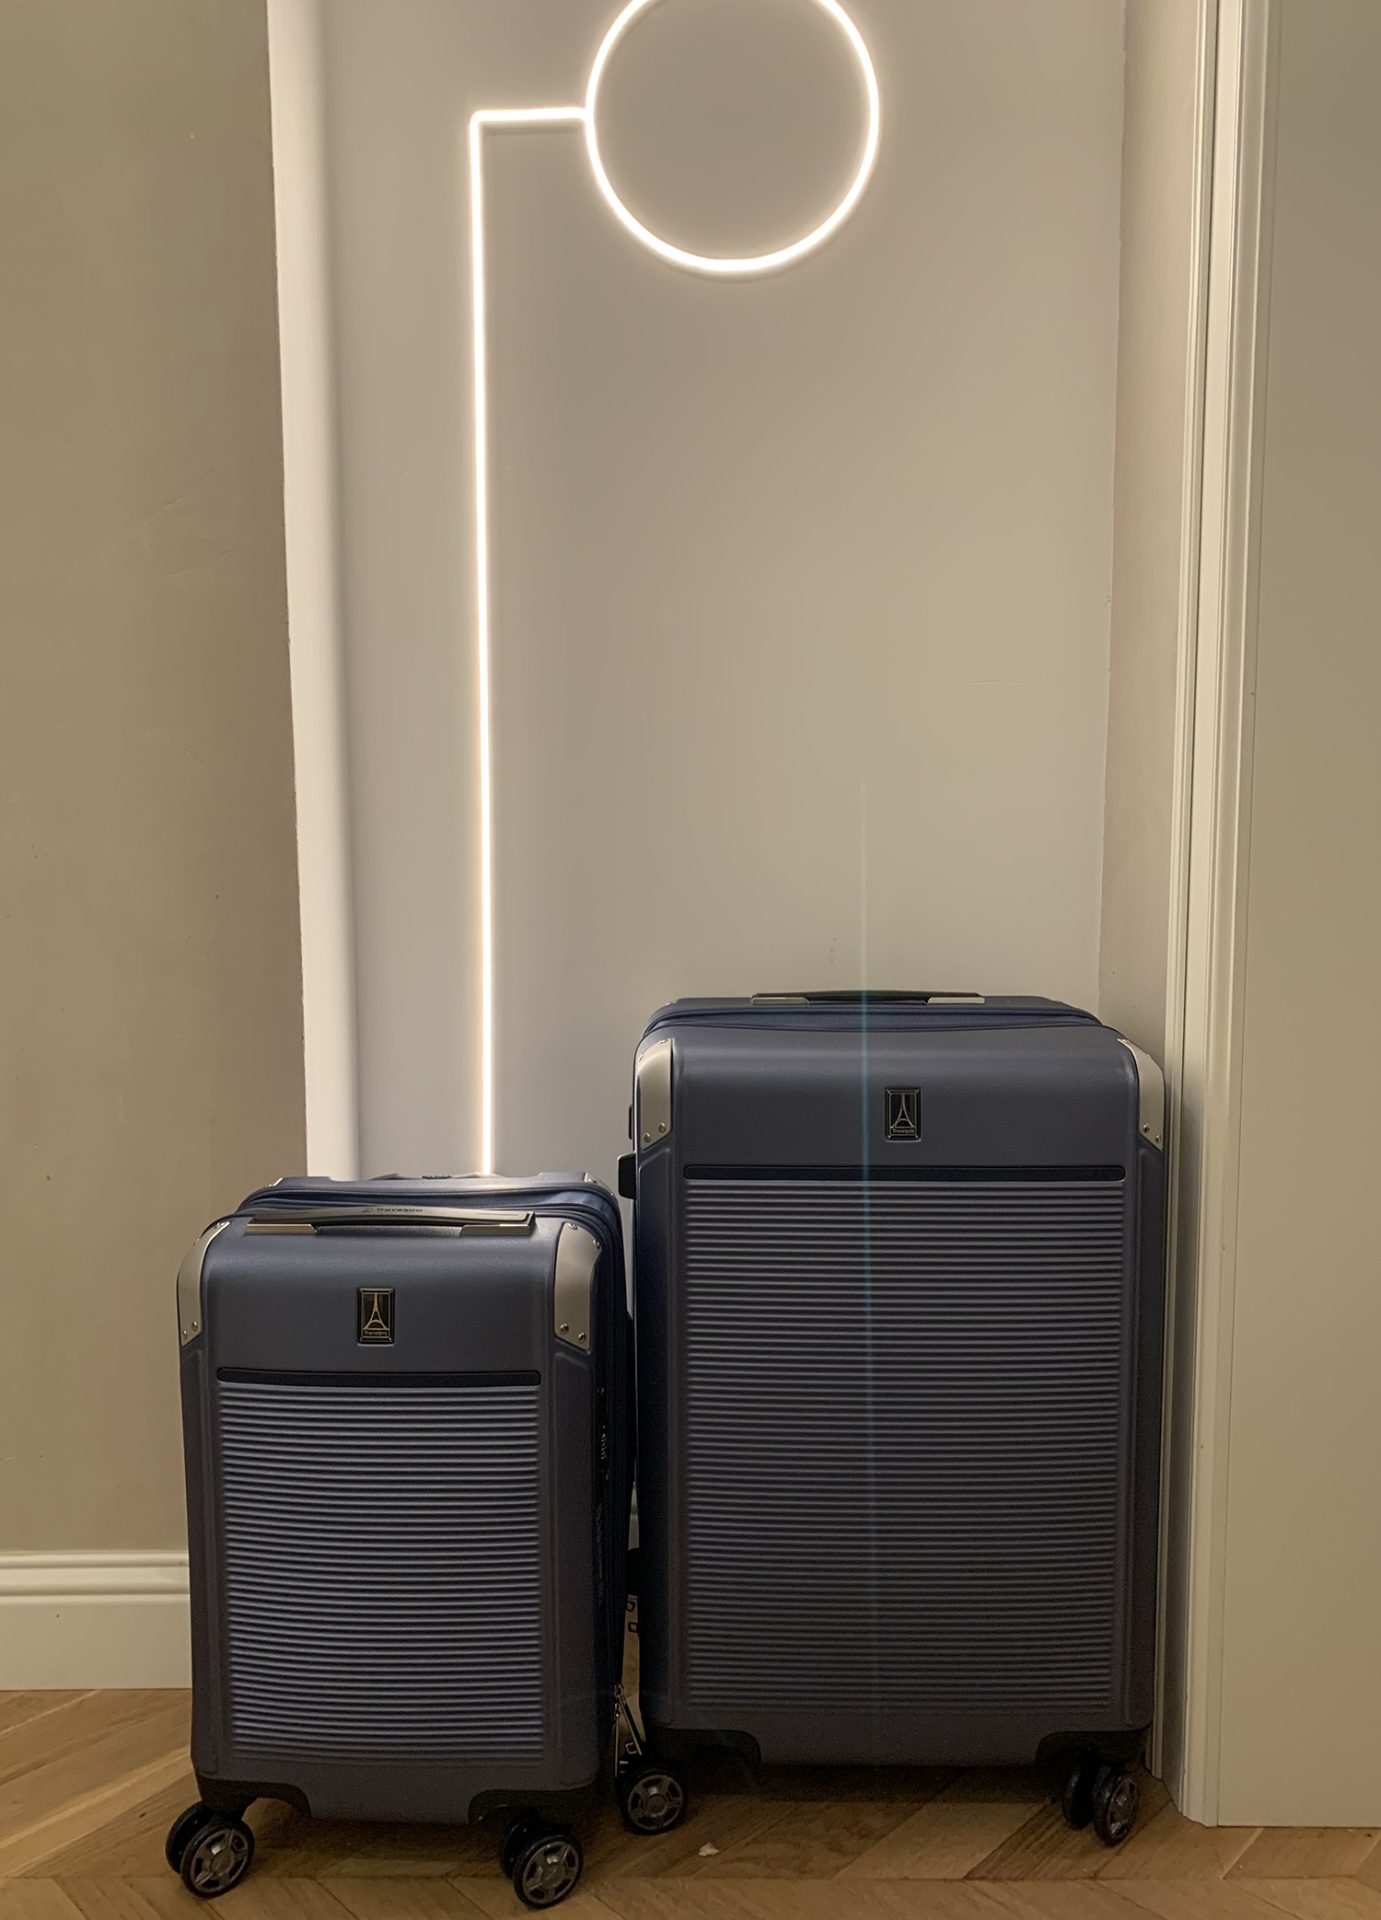 TravelPro luggage in hotel